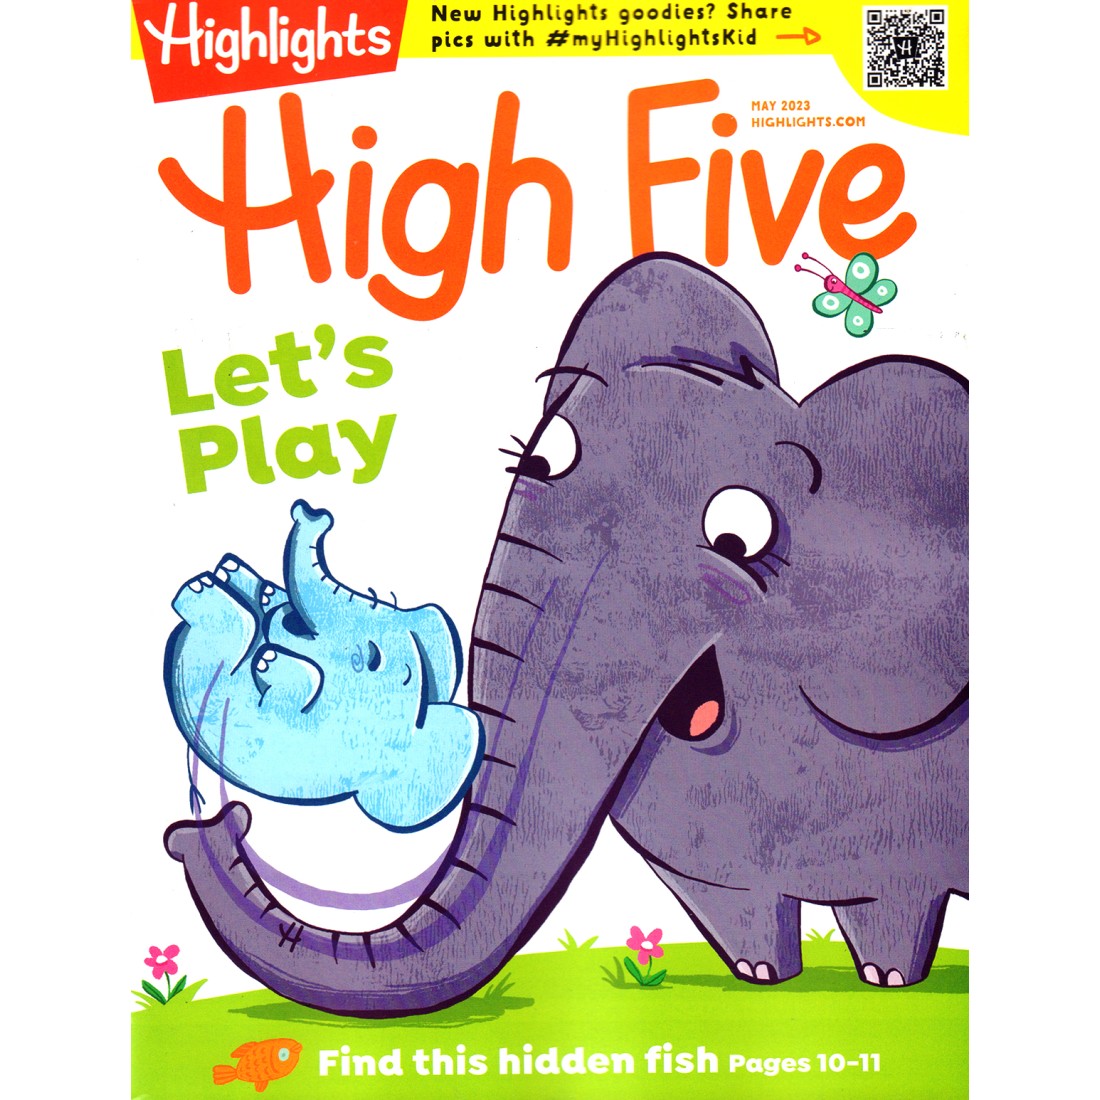 Subscribe or Renew Highlights High Five Magazine Subscription. Save 42